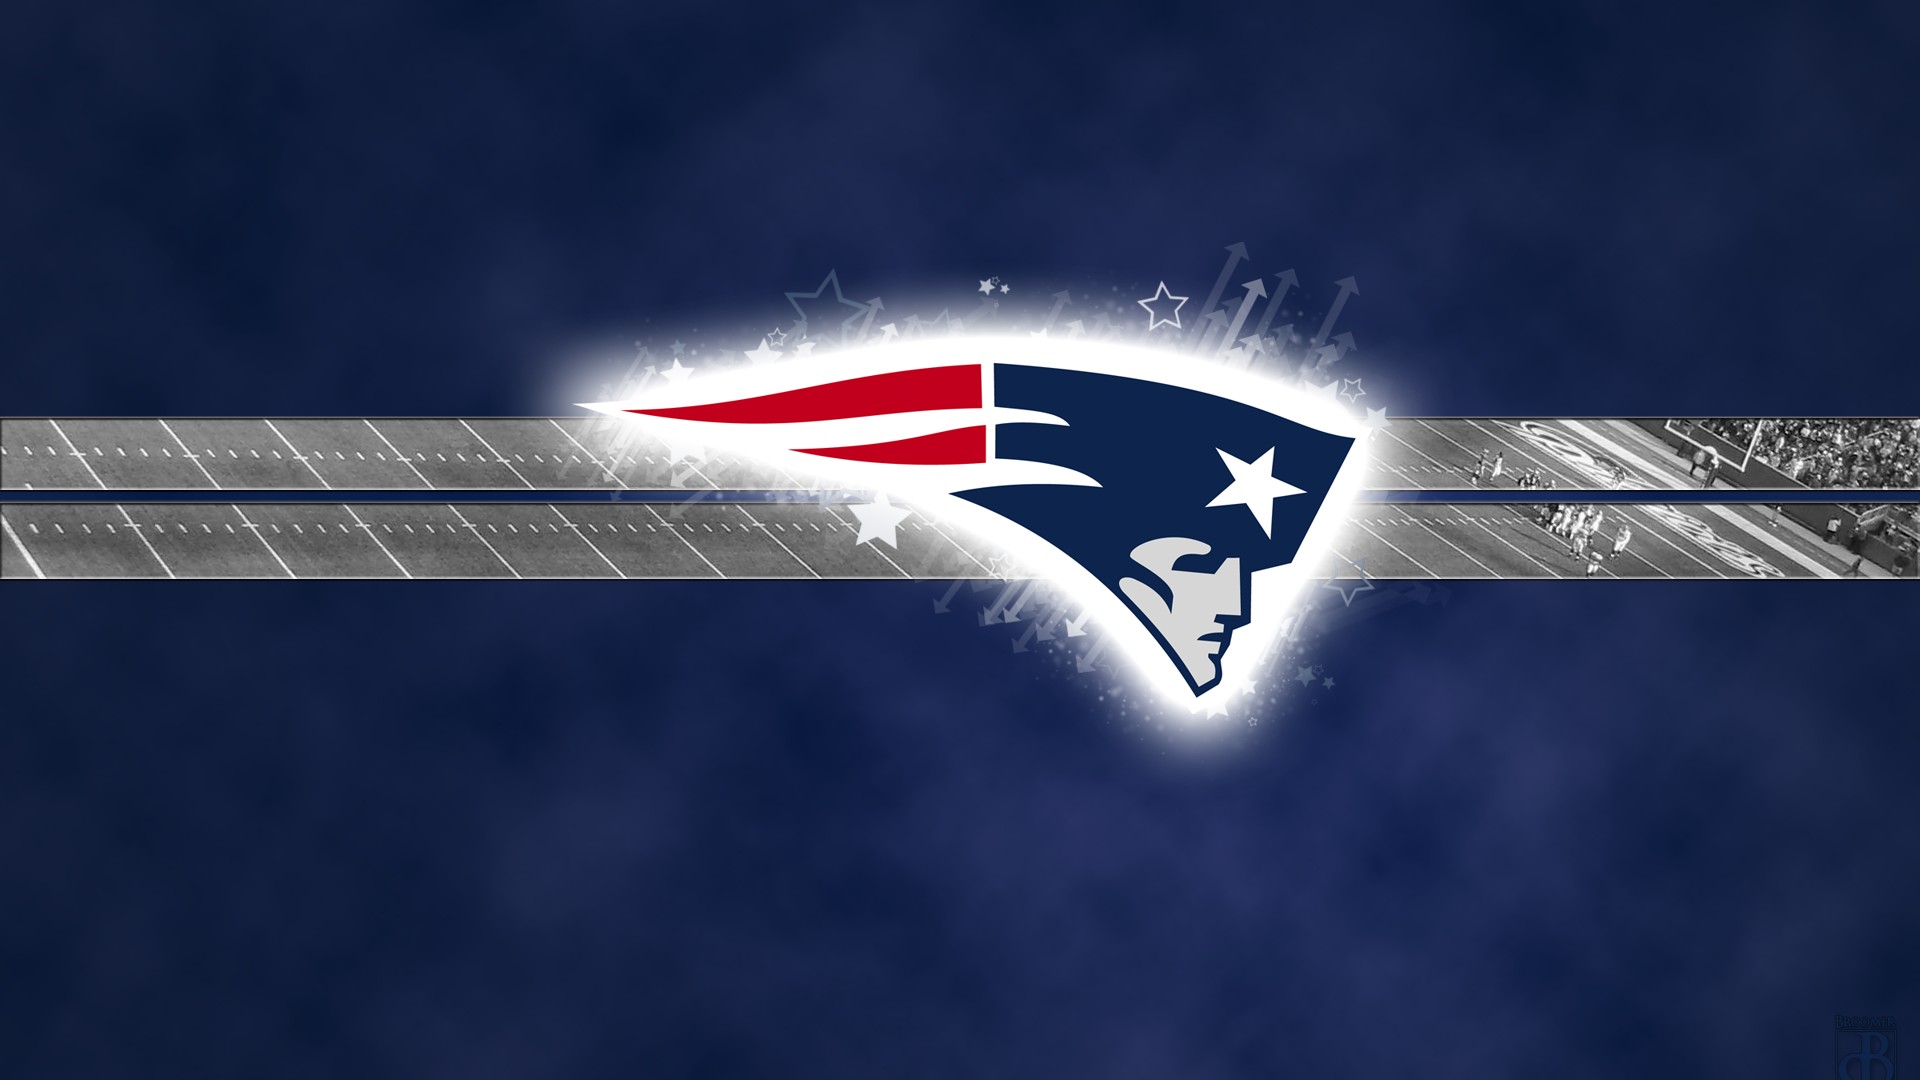 HD NE Patriots Backgrounds with resolution 1920x1080 pixel. You can make this wallpaper for your Mac or Windows Desktop Background, iPhone, Android or Tablet and another Smartphone device